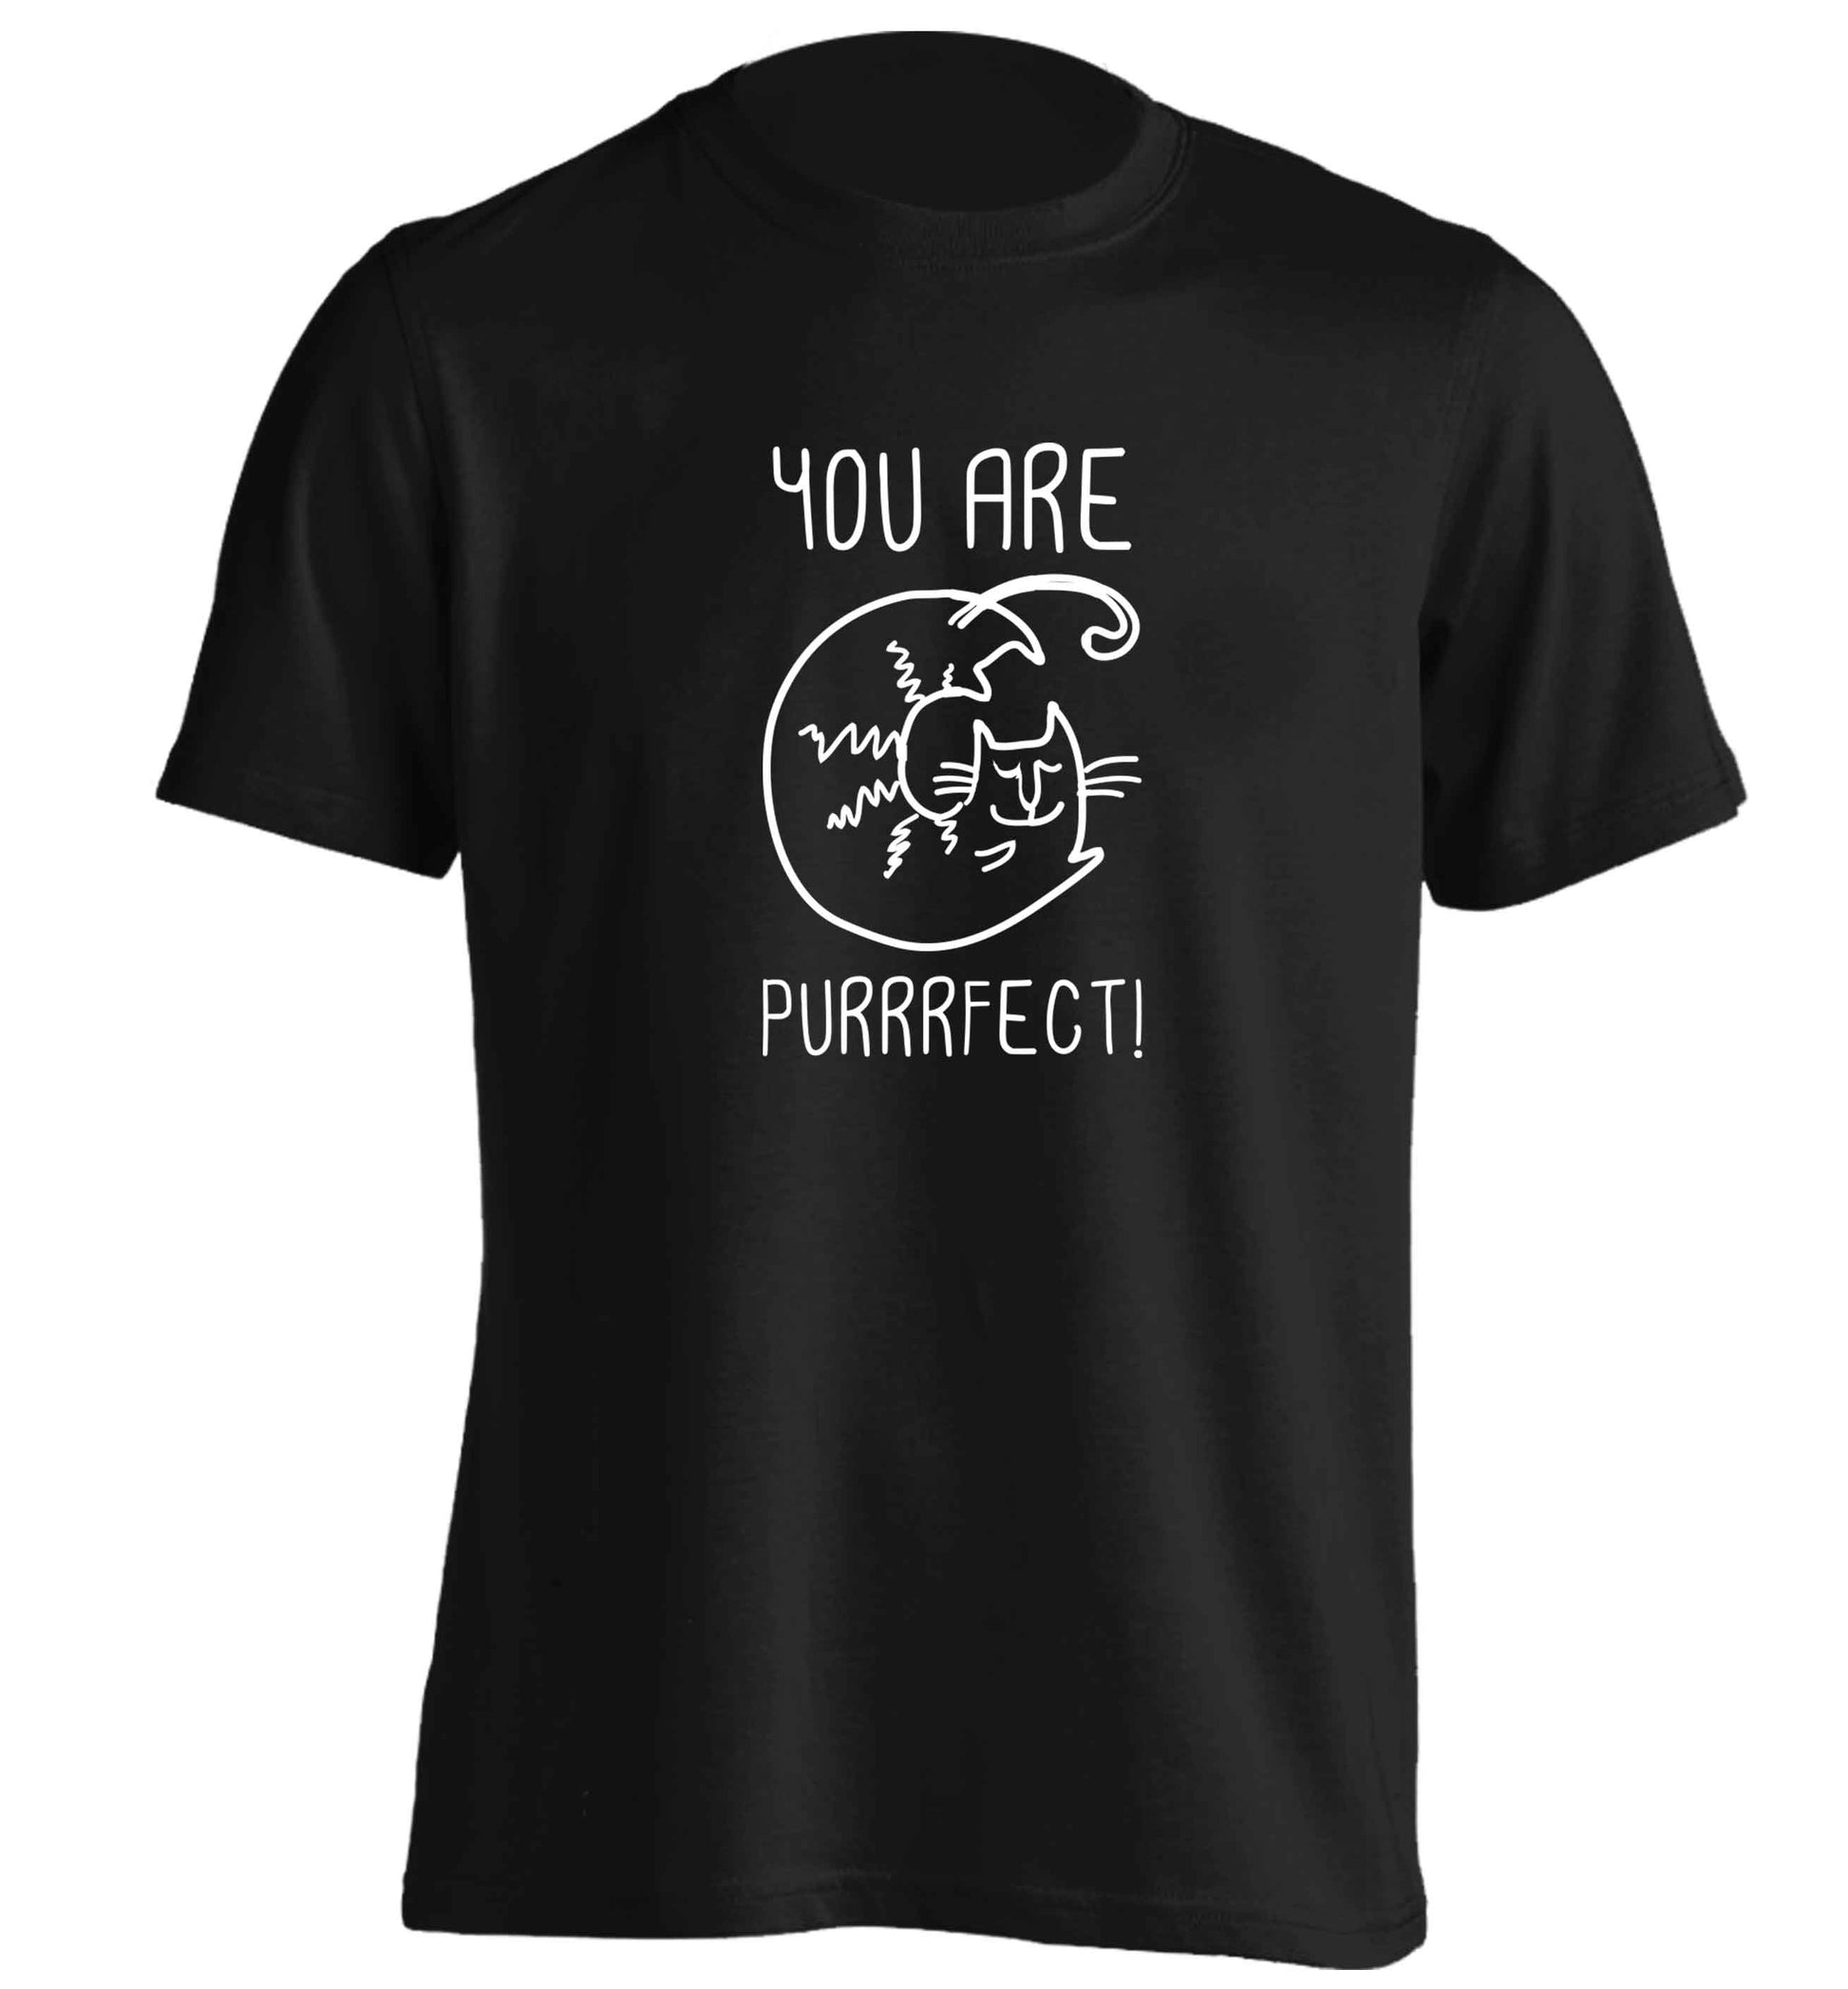 You are purrfect adults unisex black Tshirt 2XL